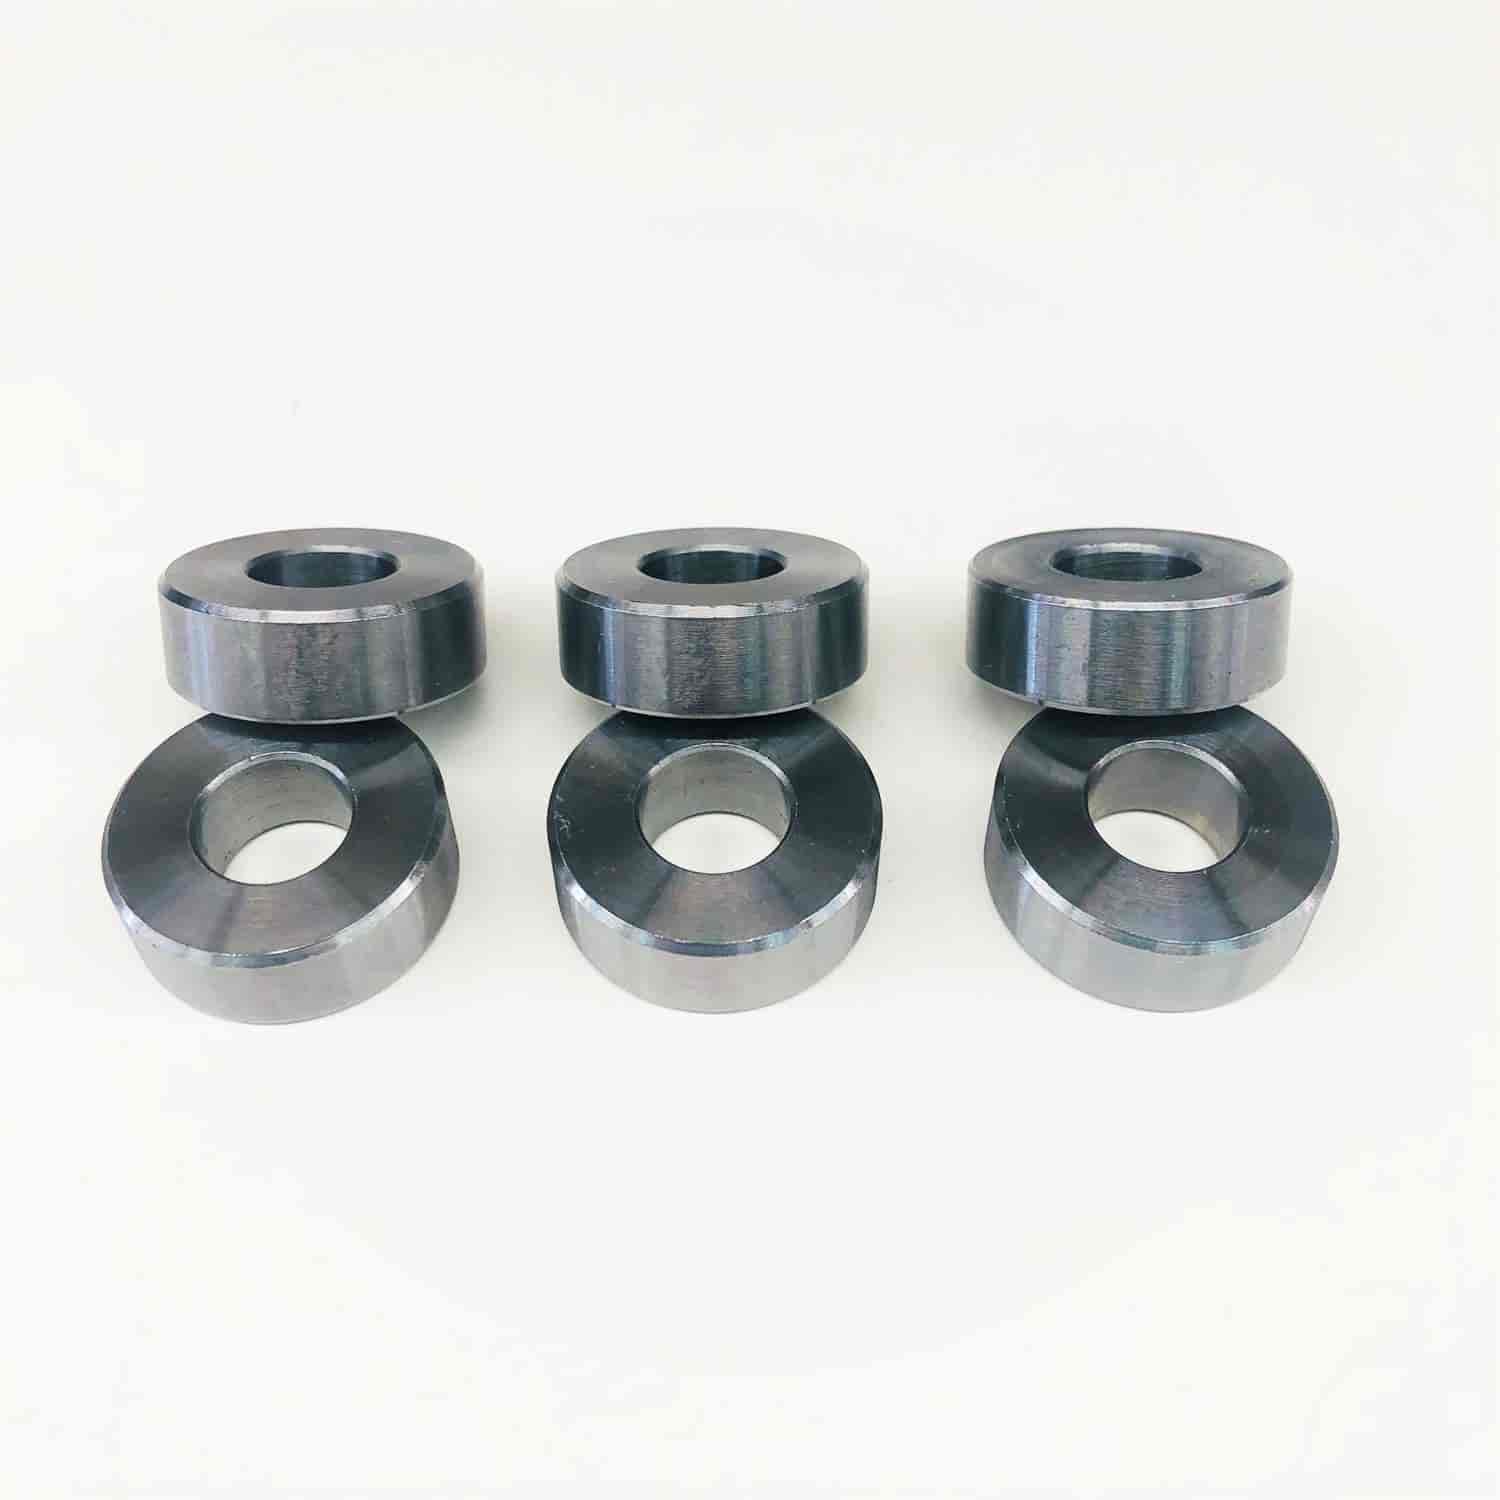 Torque Converter Spacers (Shims) .350 in. Thick